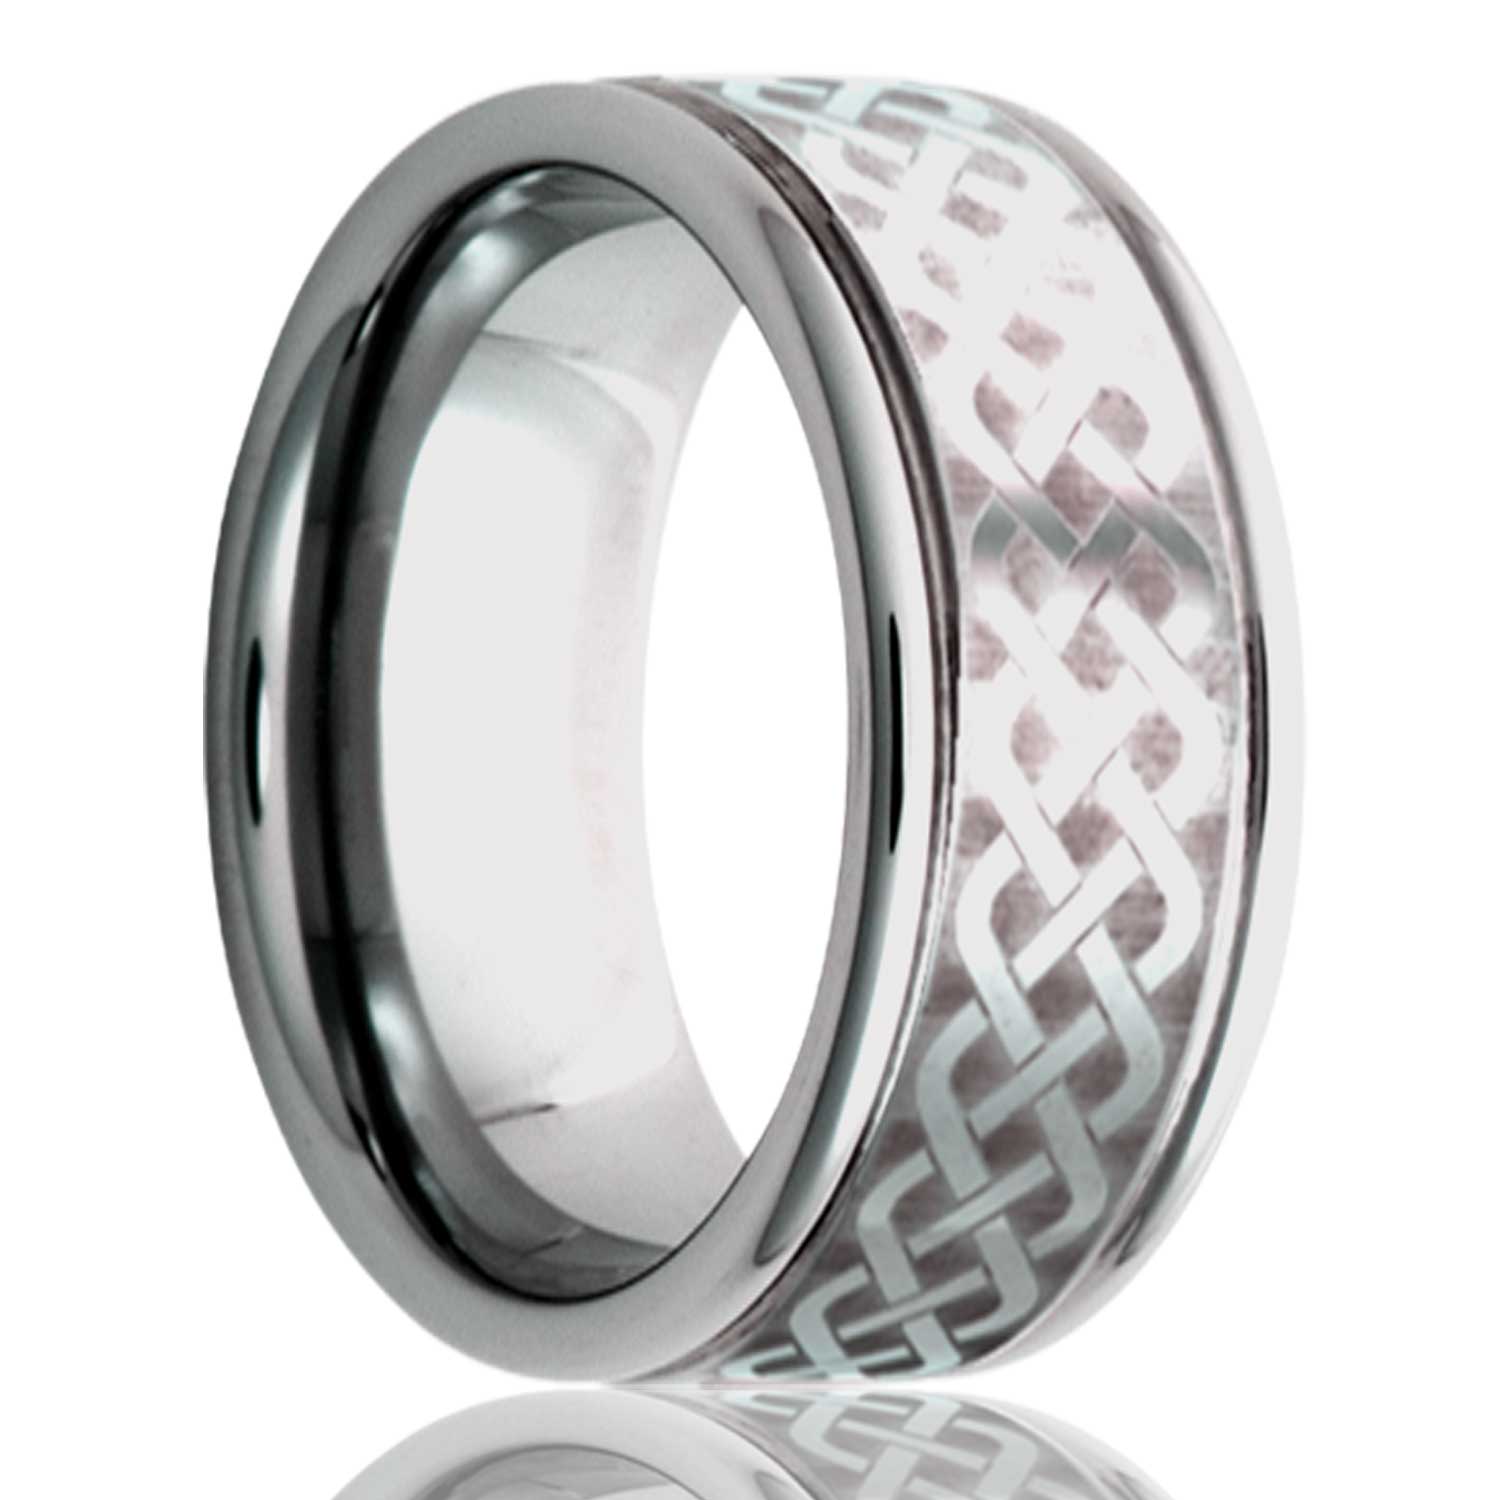 A celtic sailor's knot grooved tungsten wedding band displayed on a neutral white background.